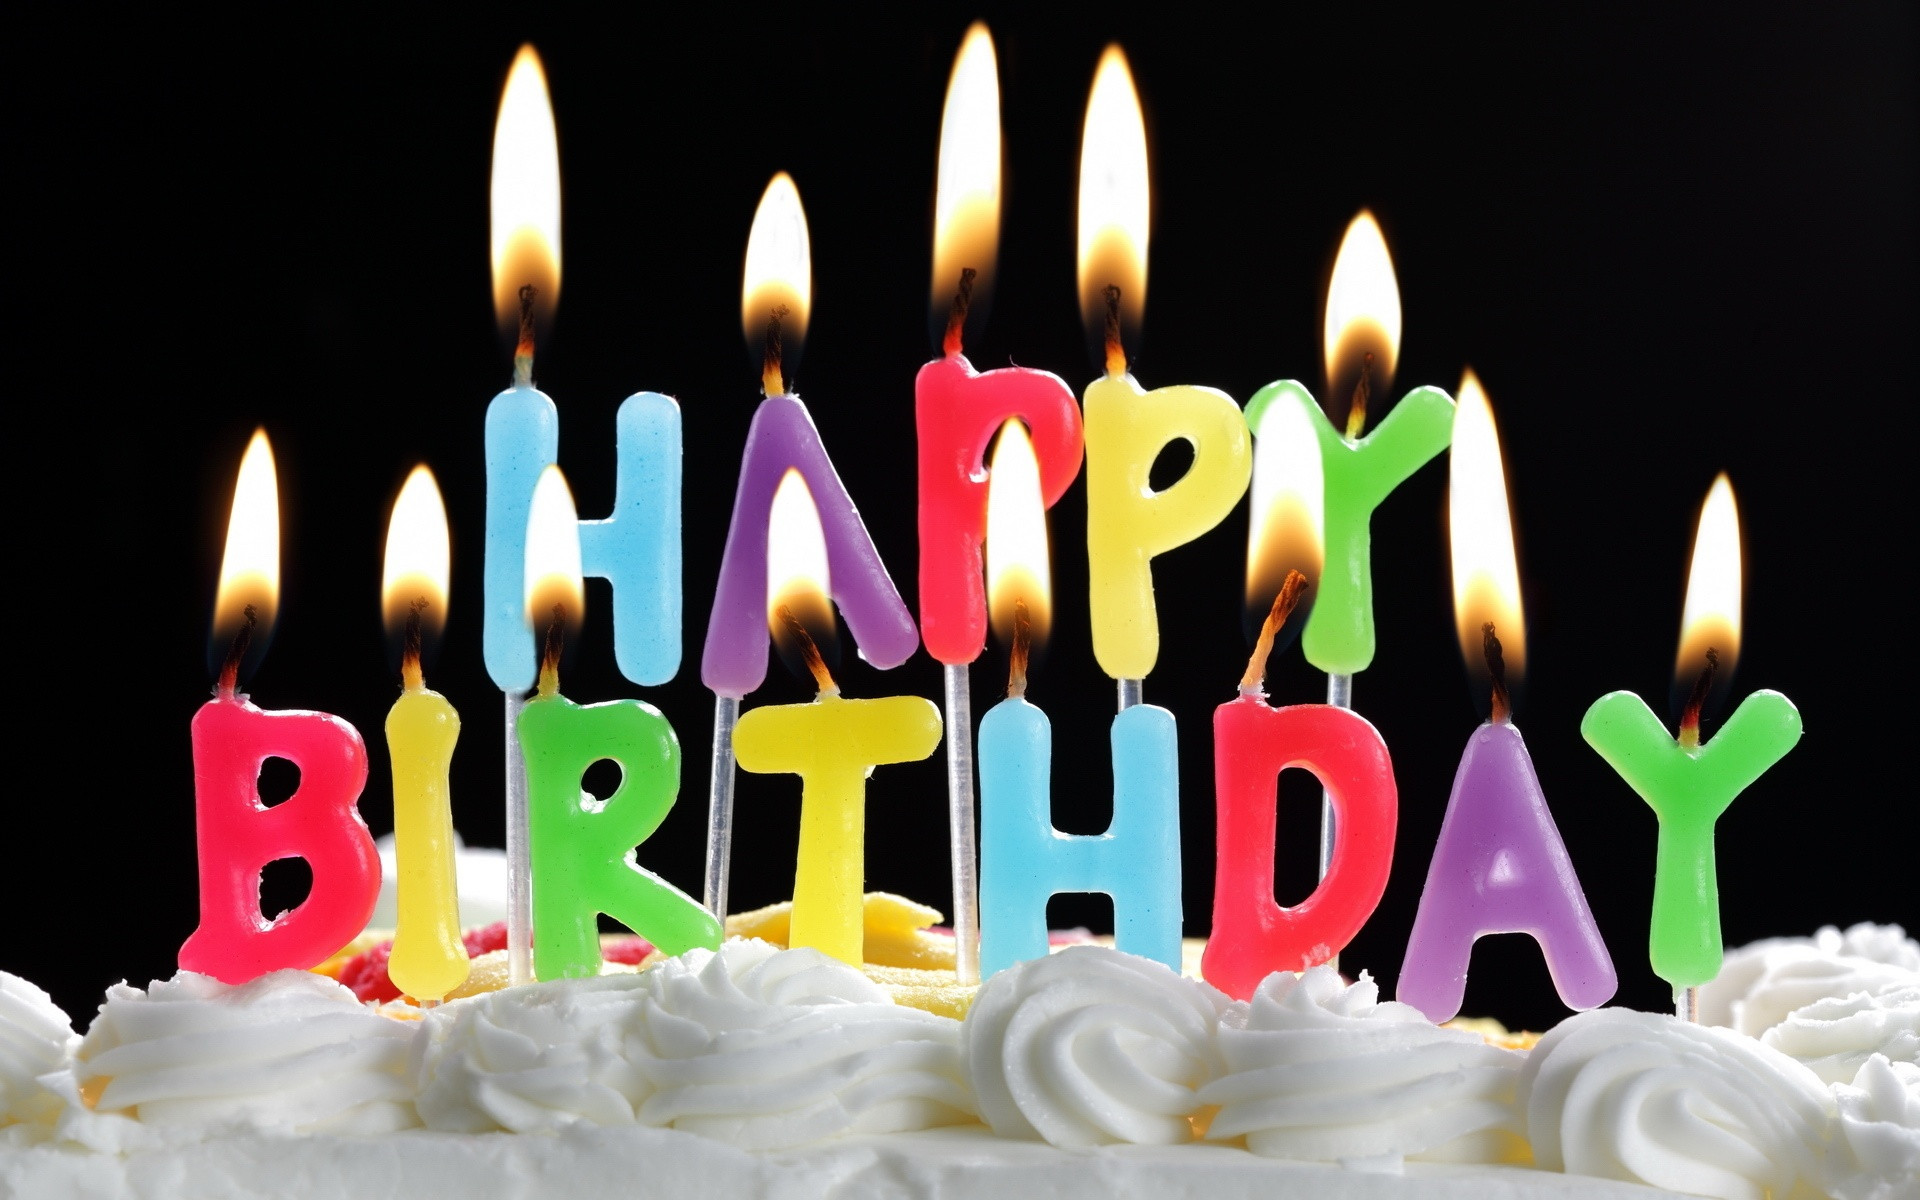 Image Of Birthday Wishes
 Best Happy Birthday Wishes For Friends – Themes pany